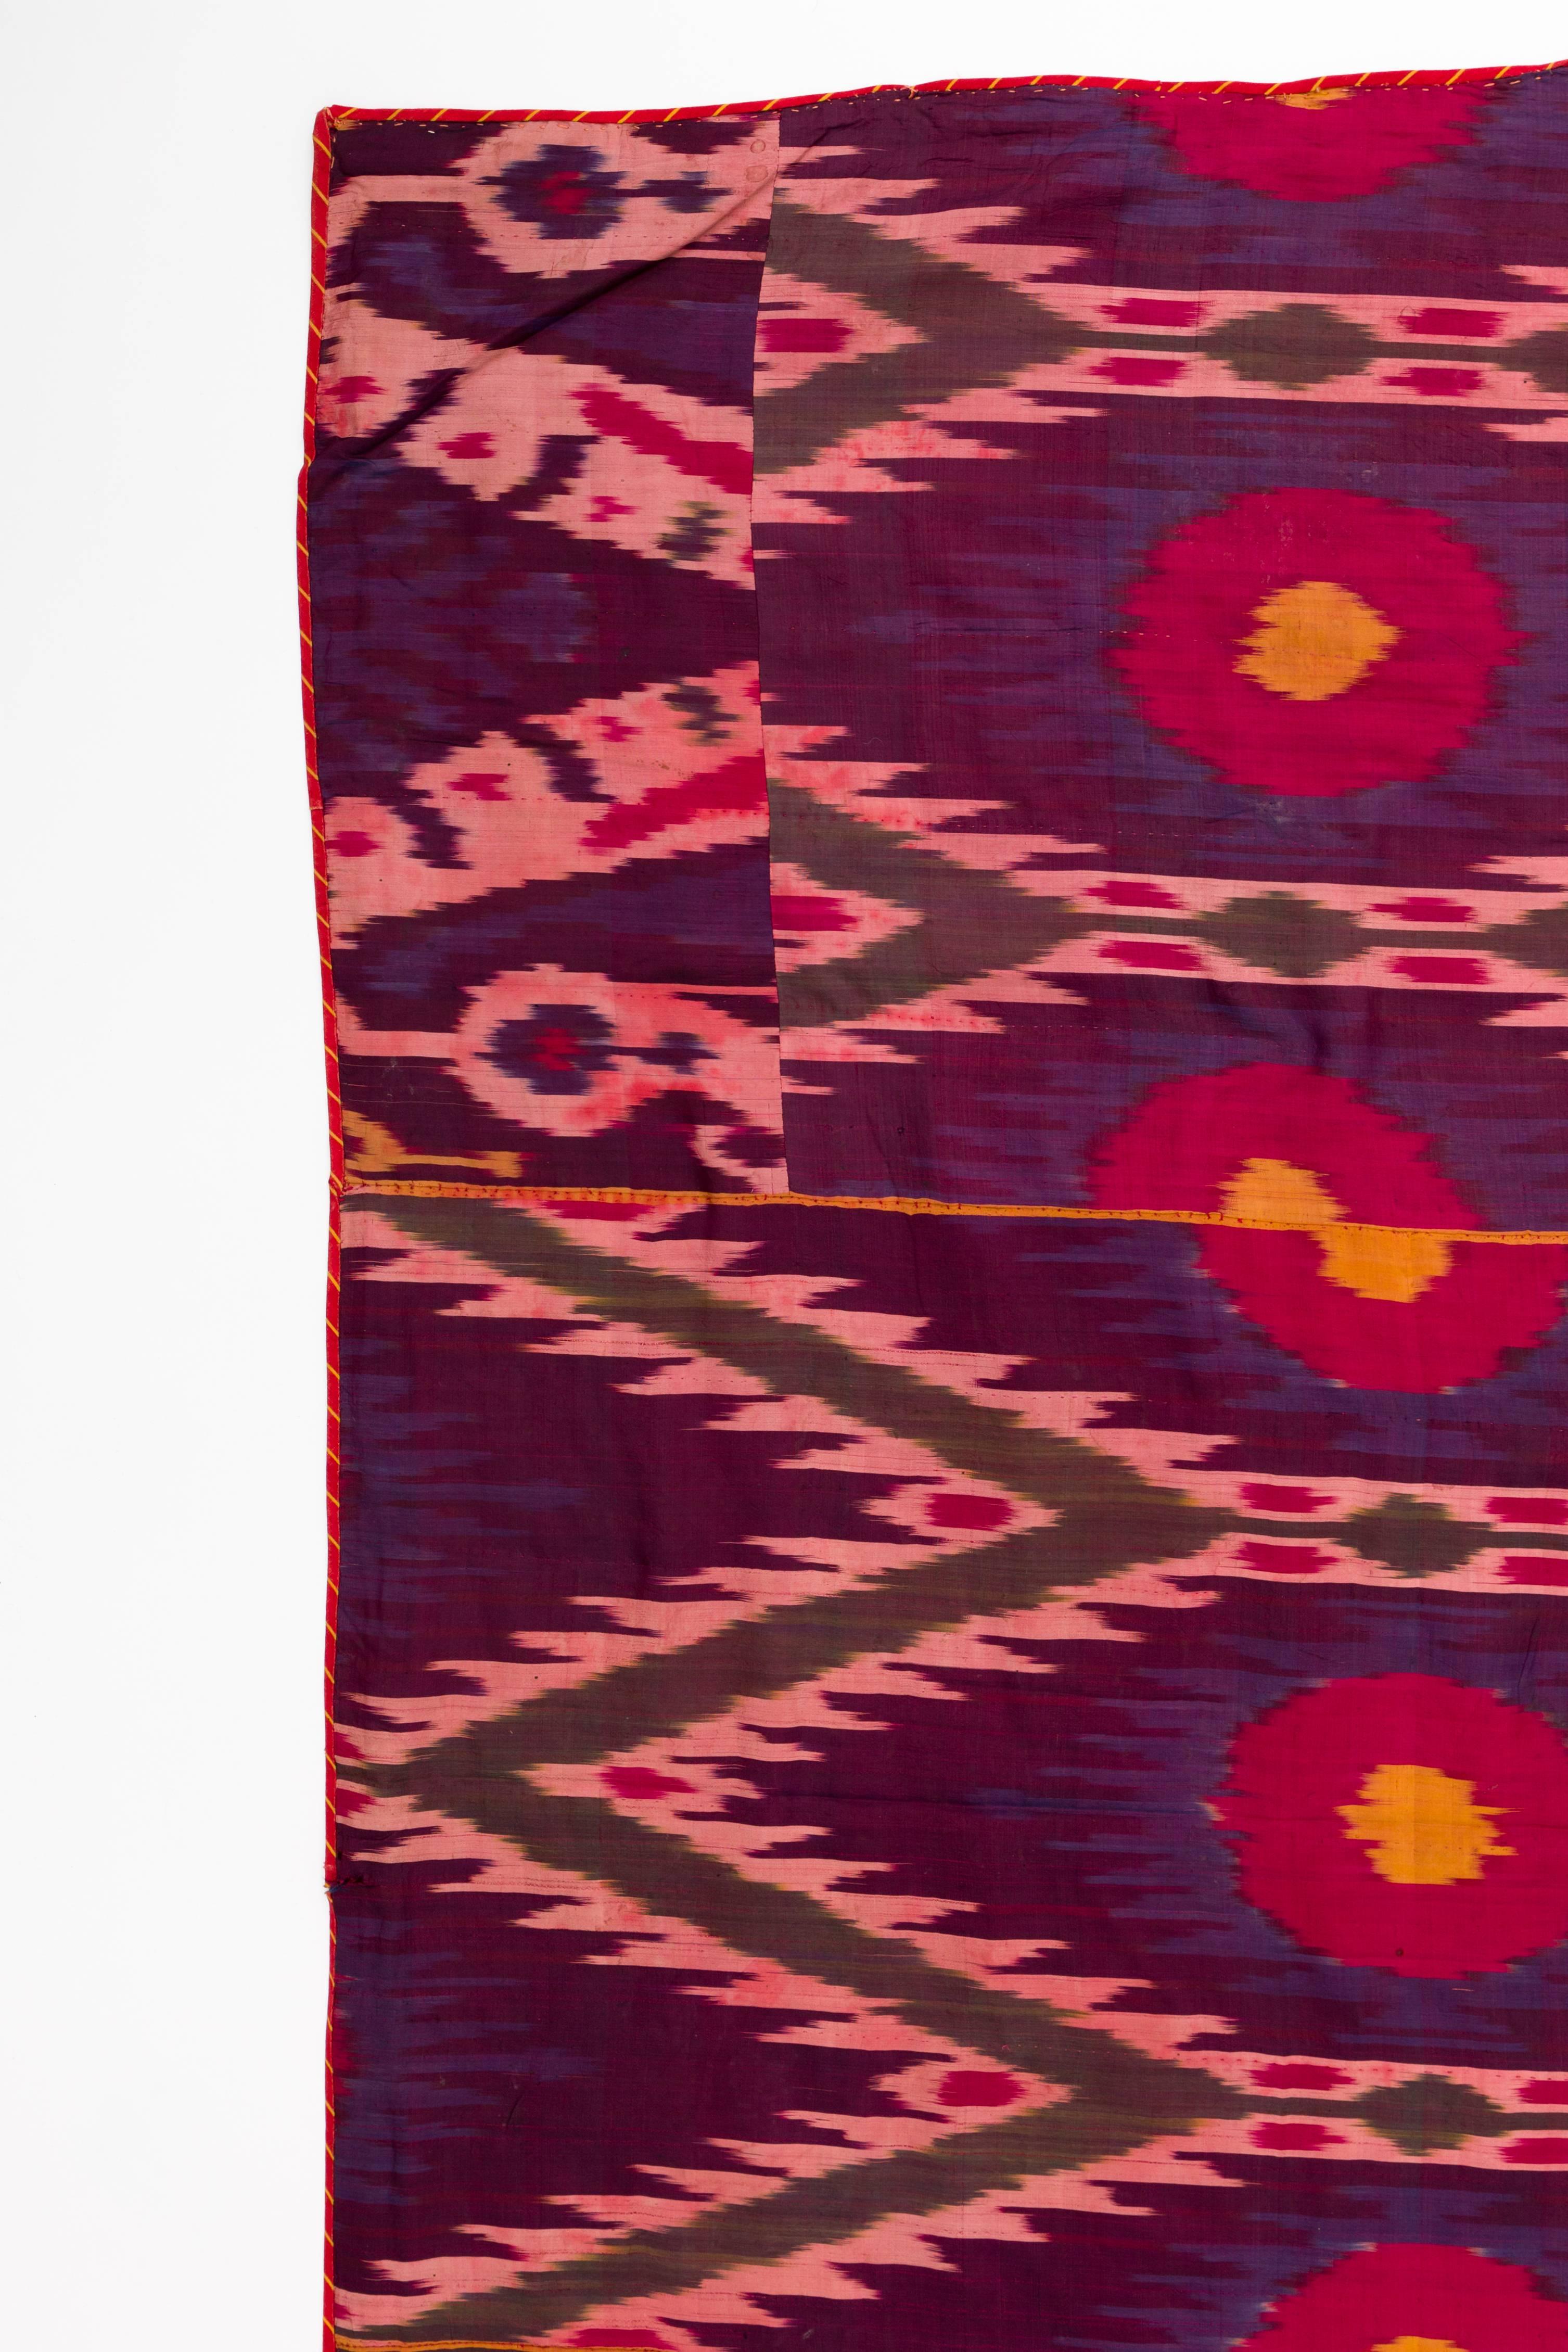 Late 19th century silk tribal Ikat weaving panel from Uzbekistan, Central Asia.
Luxurious over saturated magenta, purple, gold, green and pink. Reverse side is backed with its original 19th century gorgeous paisley cotton. Light wear to edges. Minor